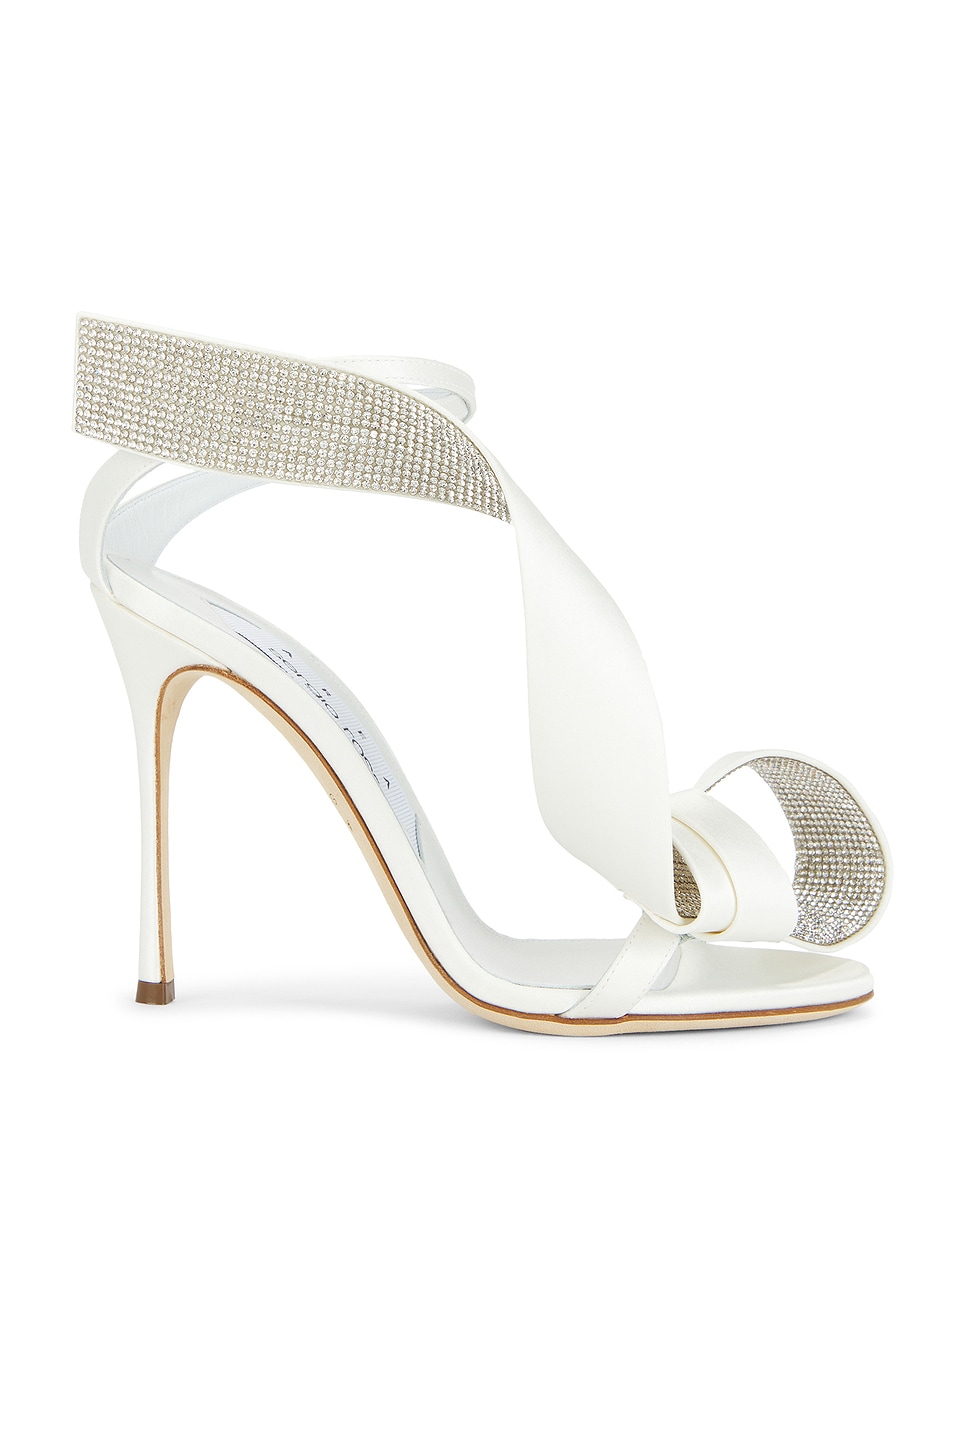 Image 1 of AREA X Sergio Rossi A5 Sandal in Bianco & Crystal